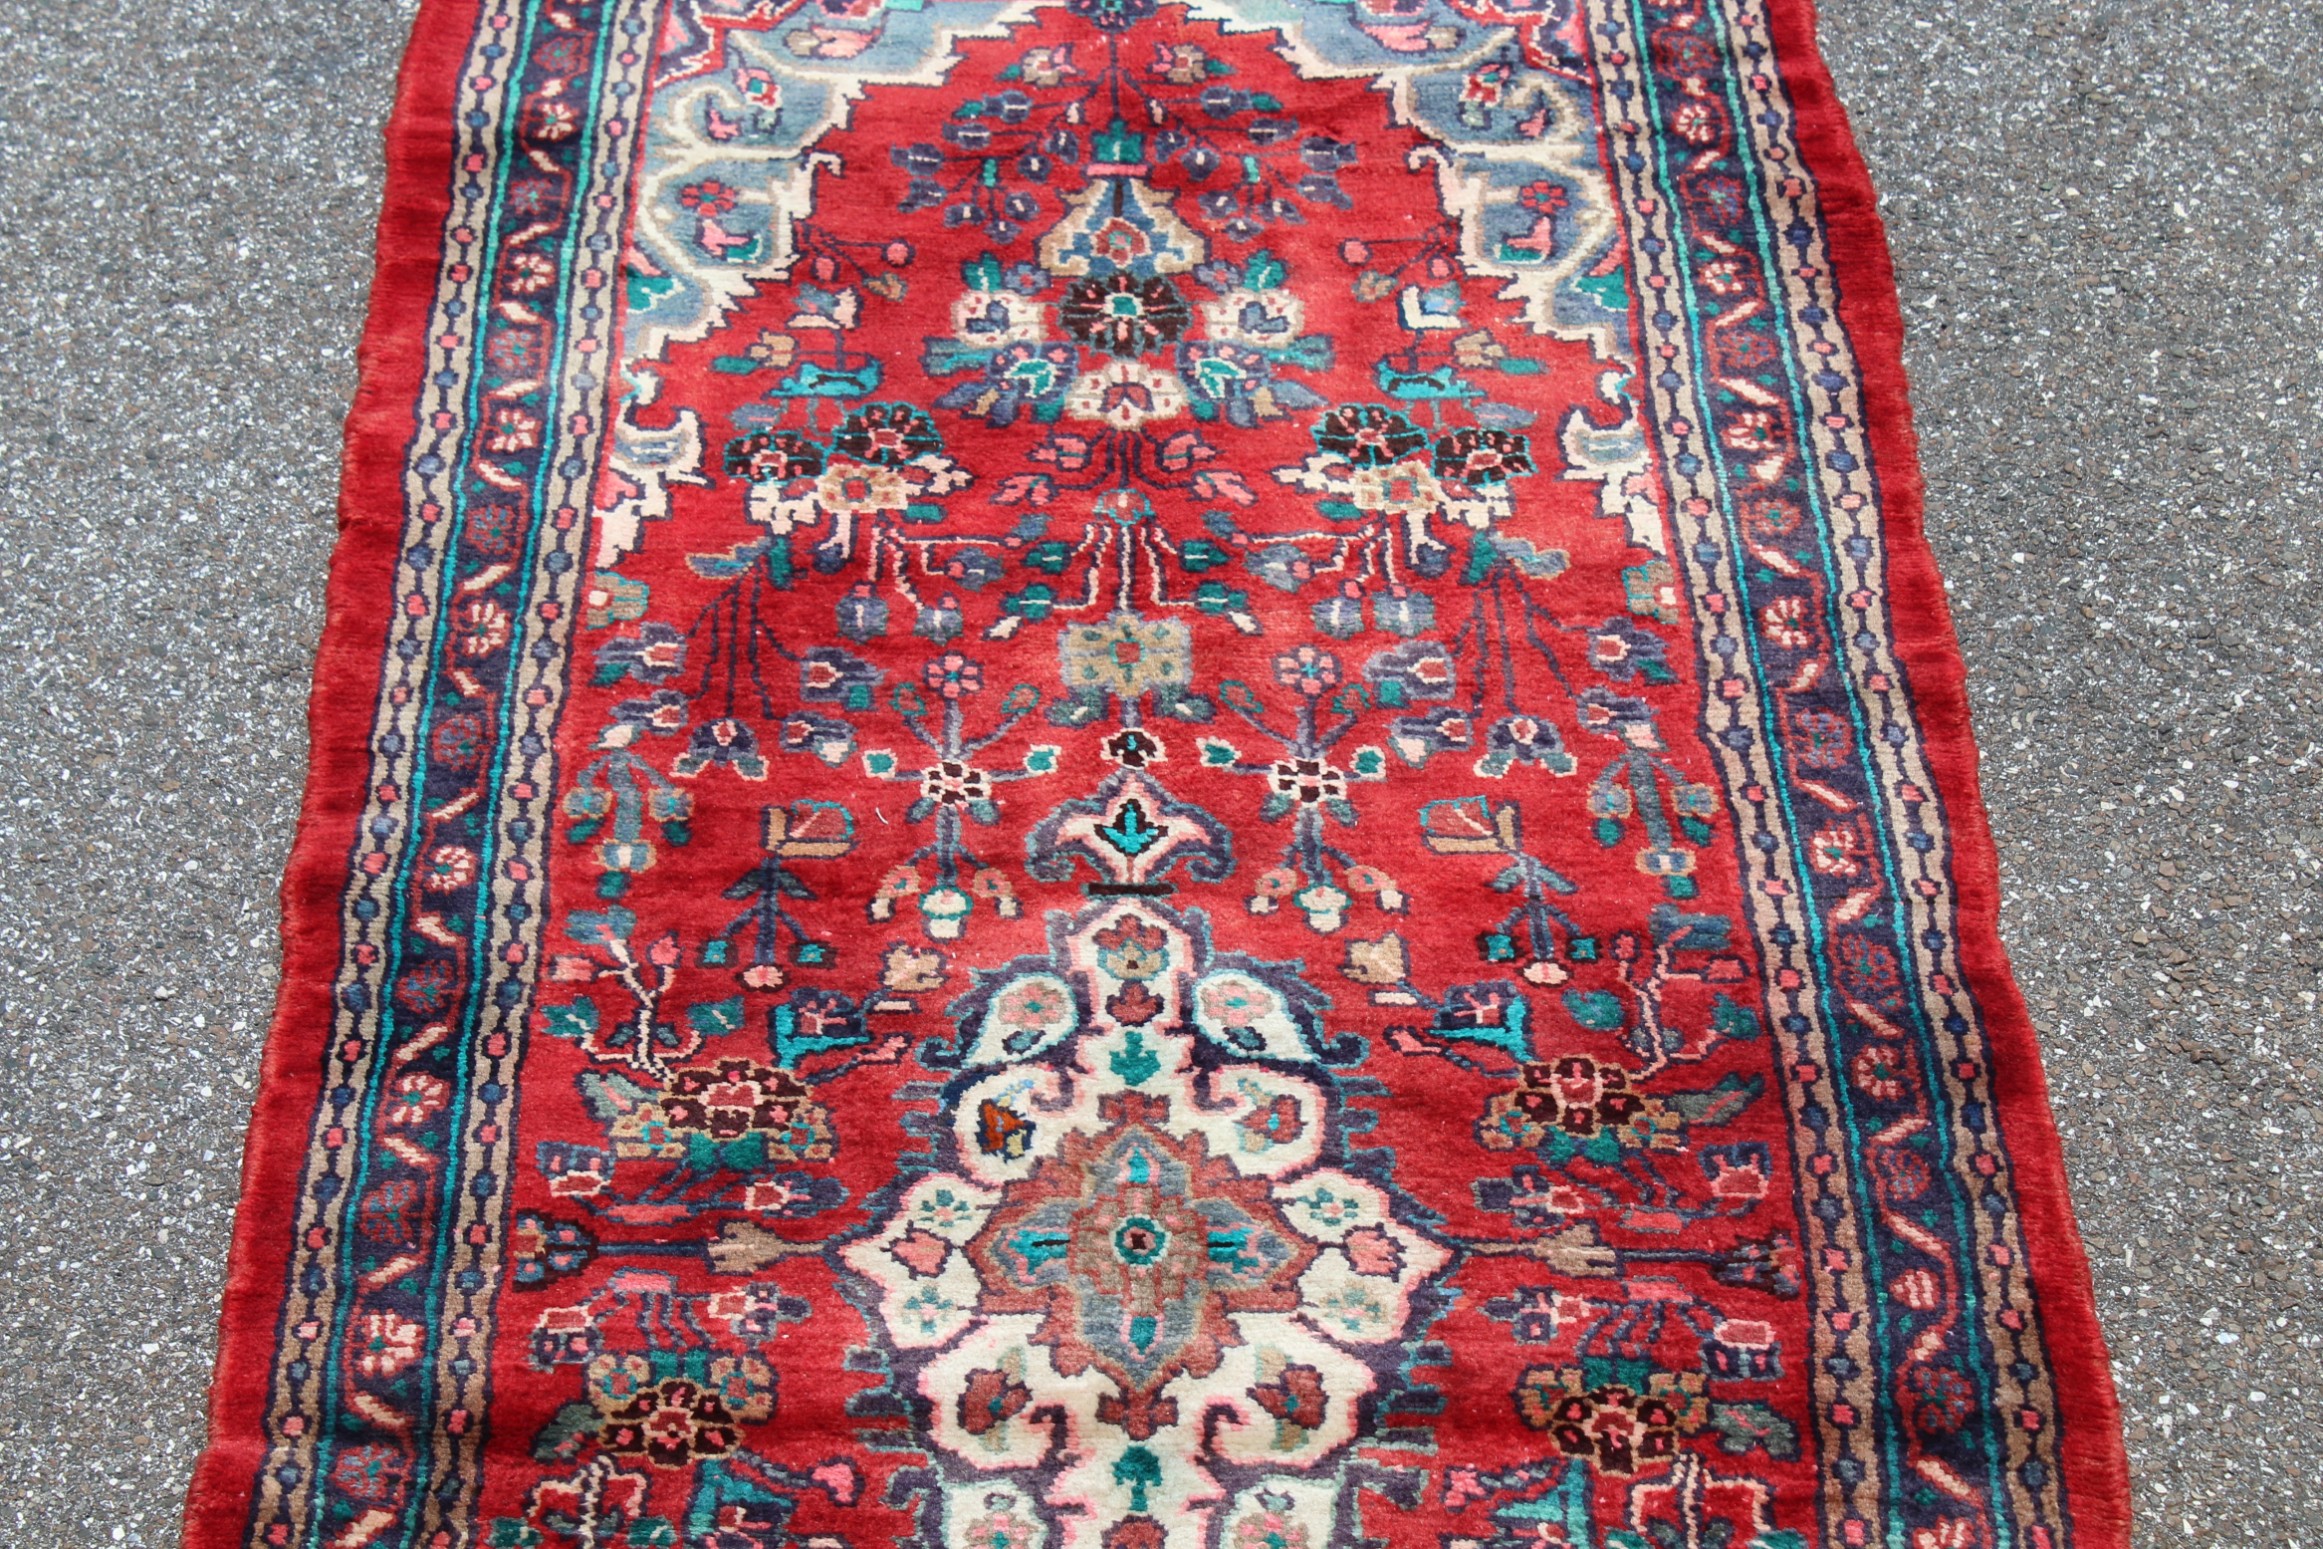 Sharuq Hand-Knotted Persian Wool Rug - 3'7" x 10' - Image 4 of 10